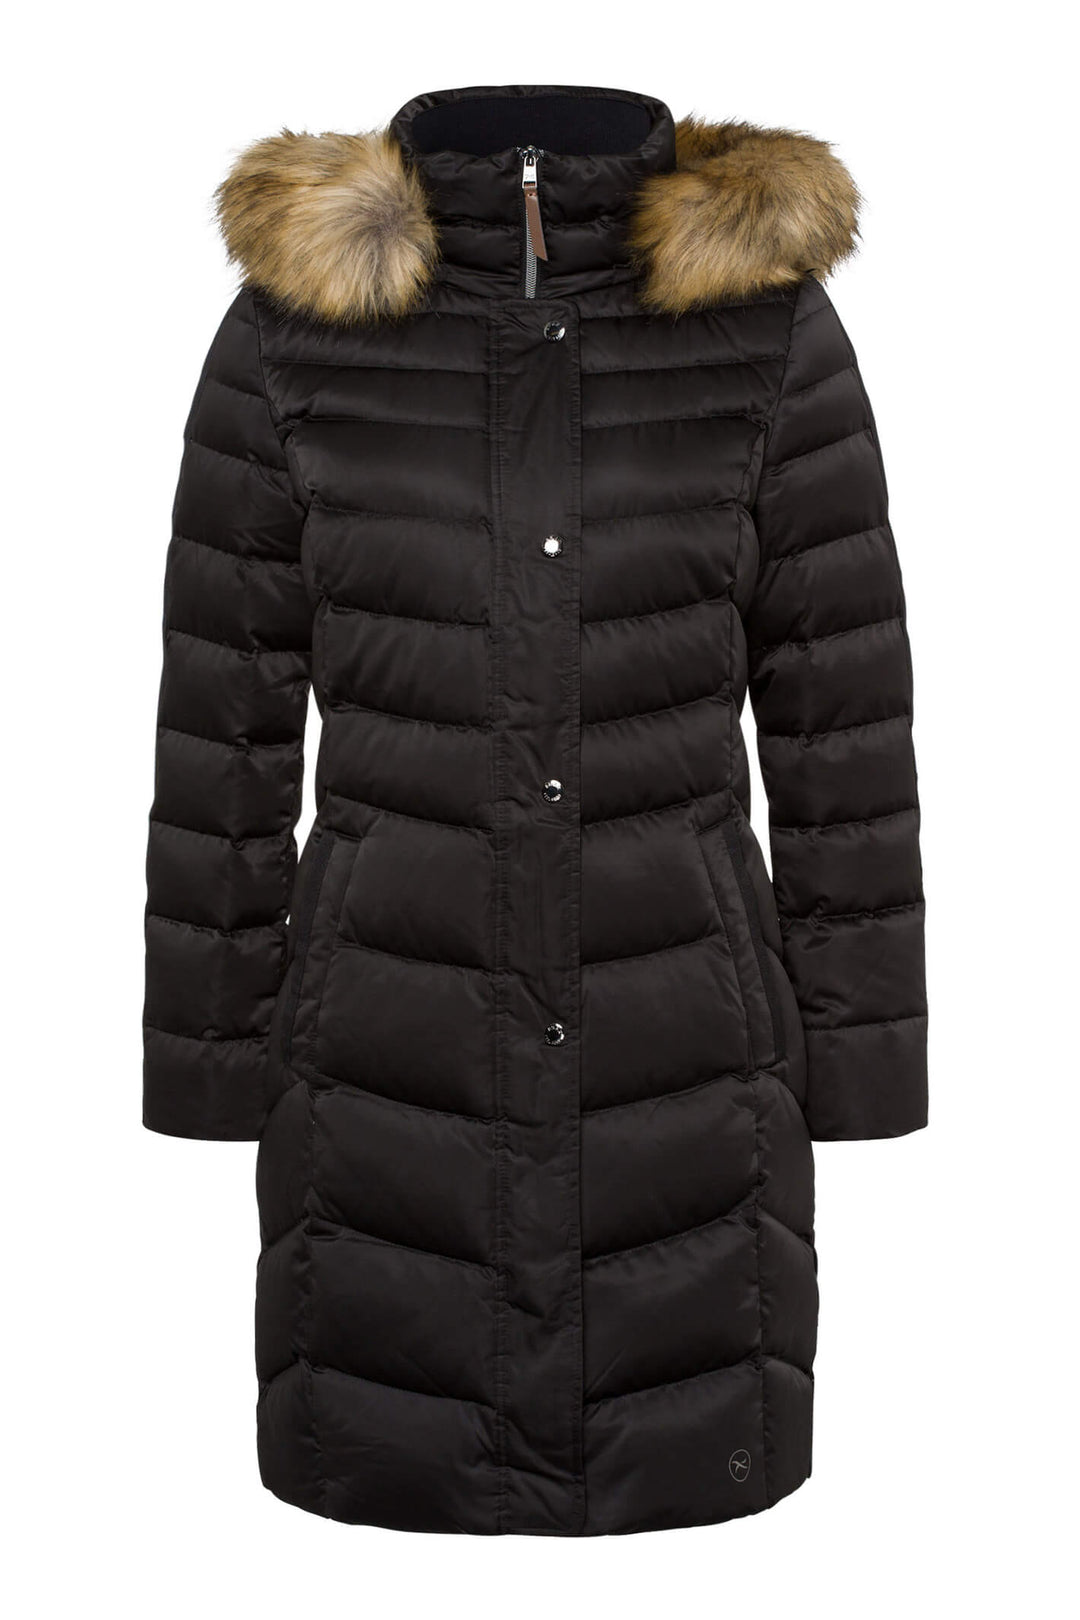 Brax Montreal 93-6337 02 Black Feel Good Coat With Faux Fur Hood - Shirley Allum Boutique